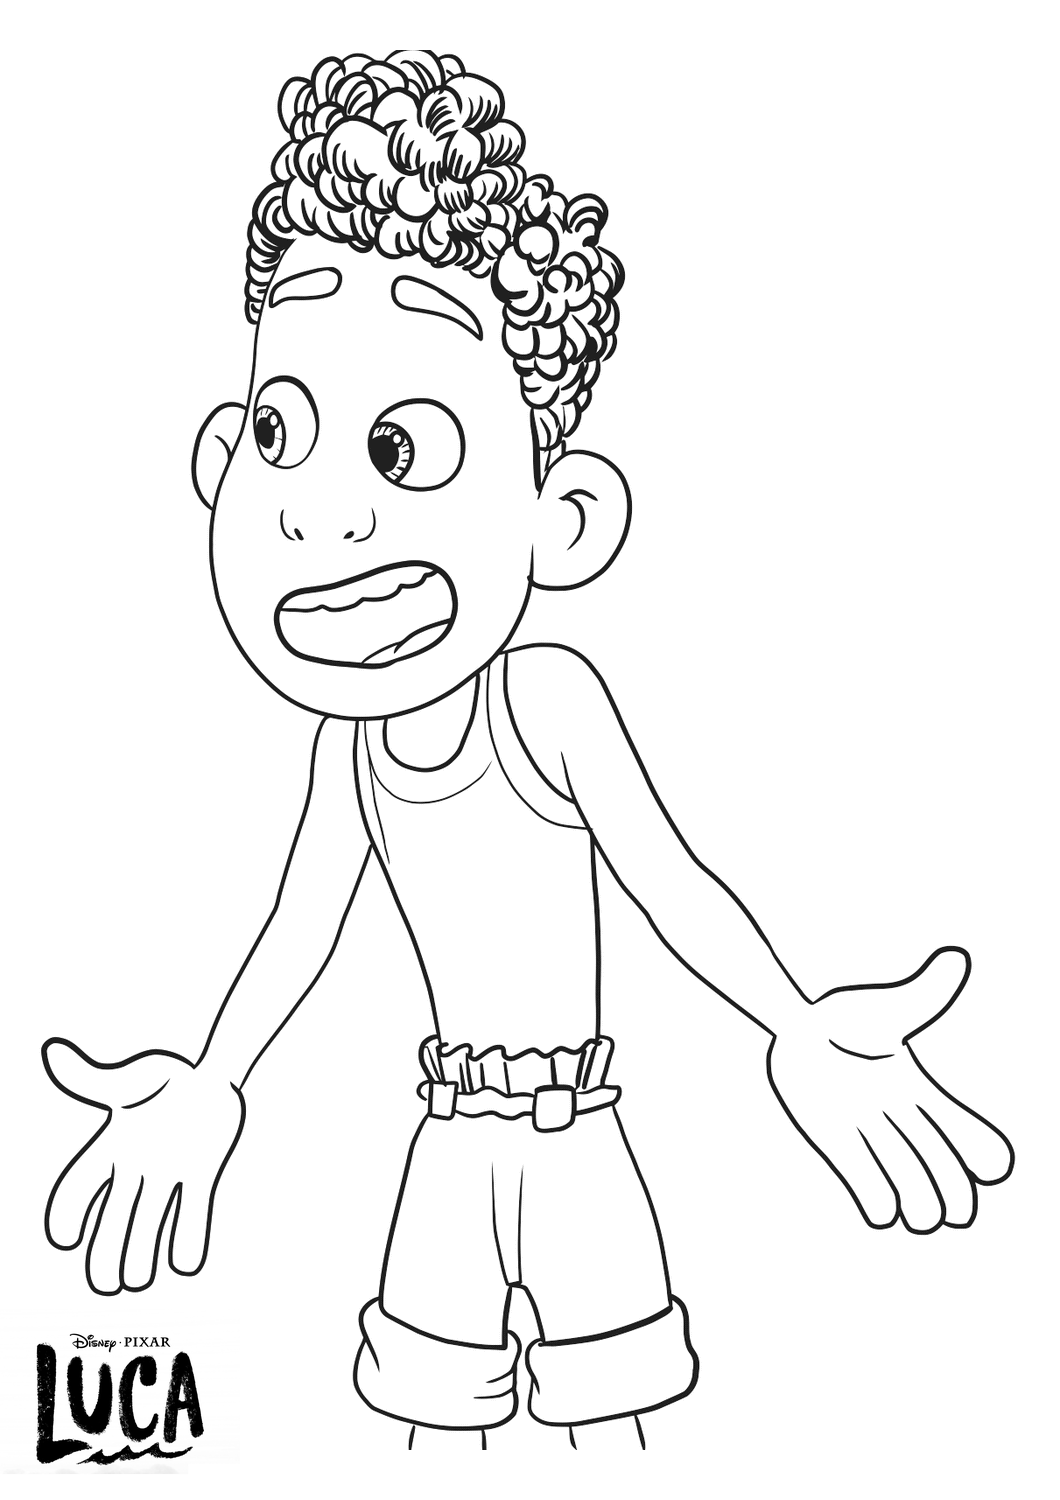 Free Luca Coloring Pages